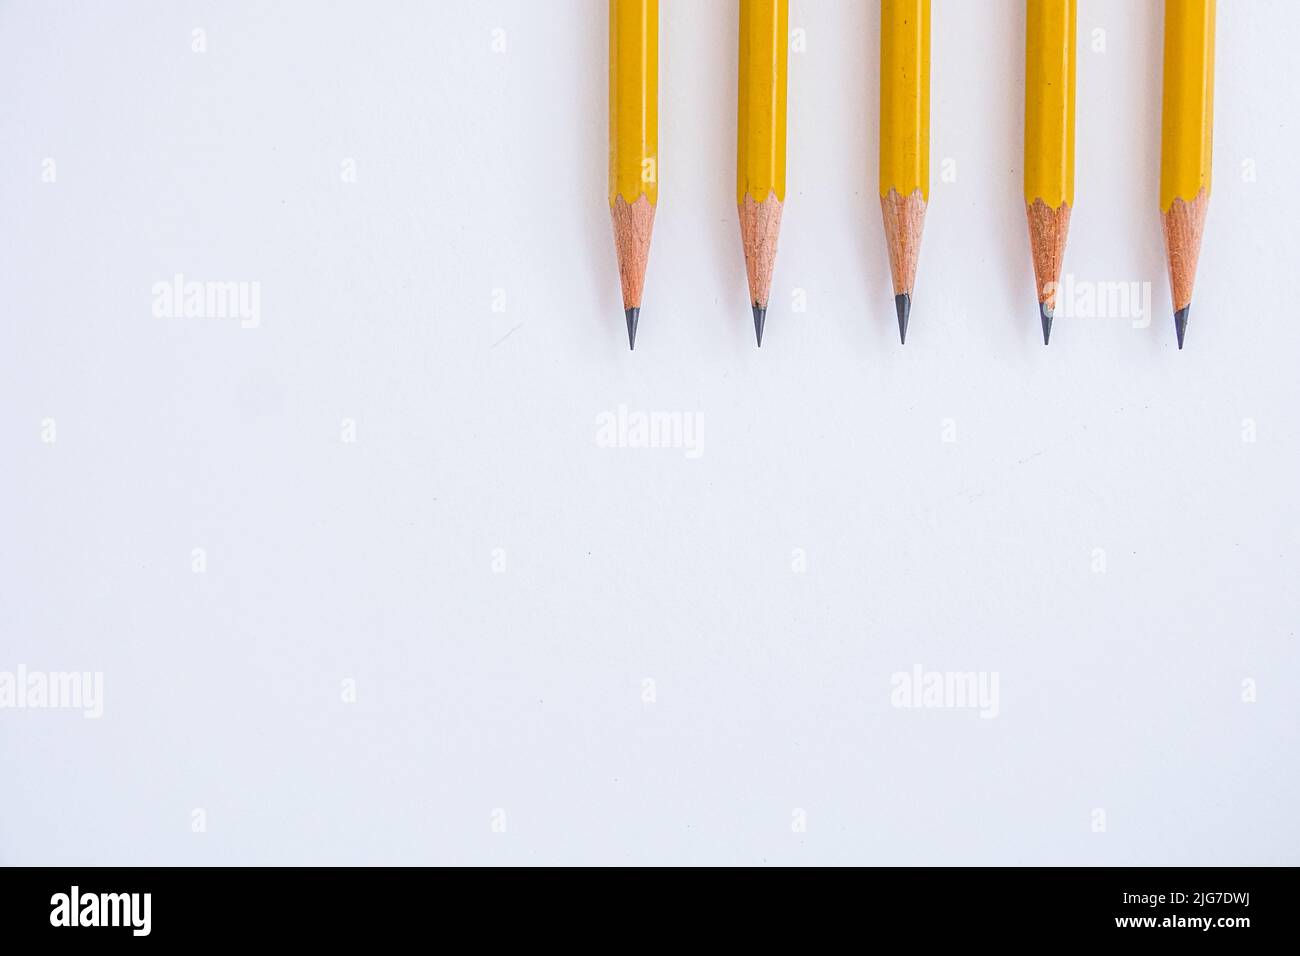 Negative space is utilized with five sharp pencils lined up on a white sheet of paper pointing downward. Stock Photo